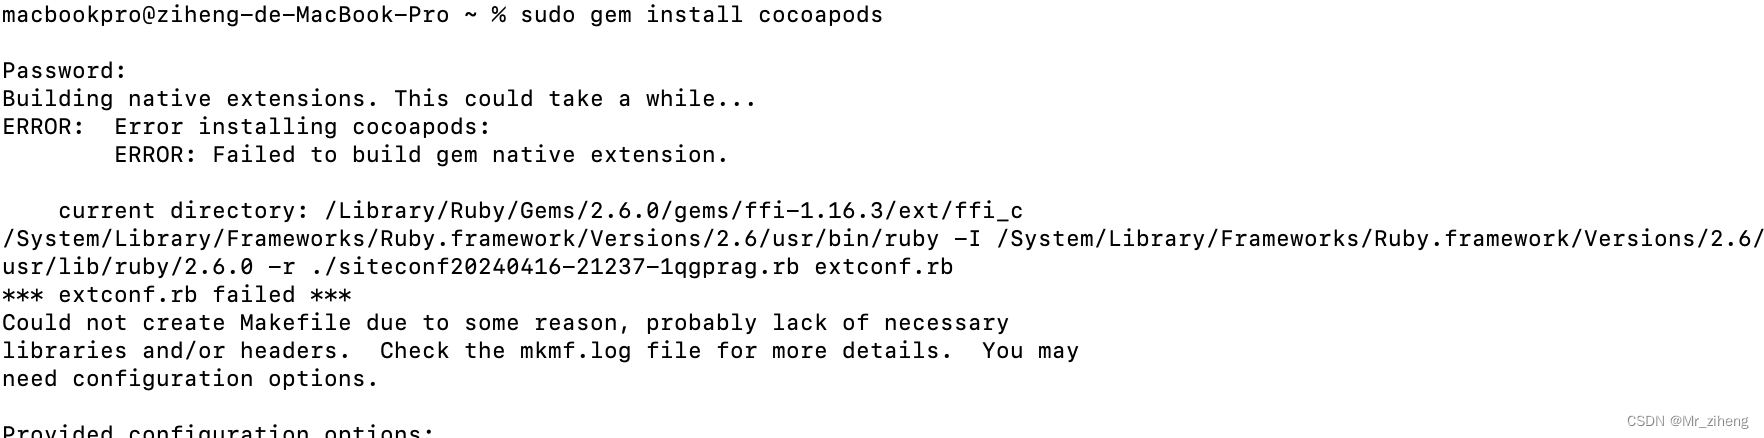 MAC安装CocoaPods遇到的错误Failed to build gem native extension.